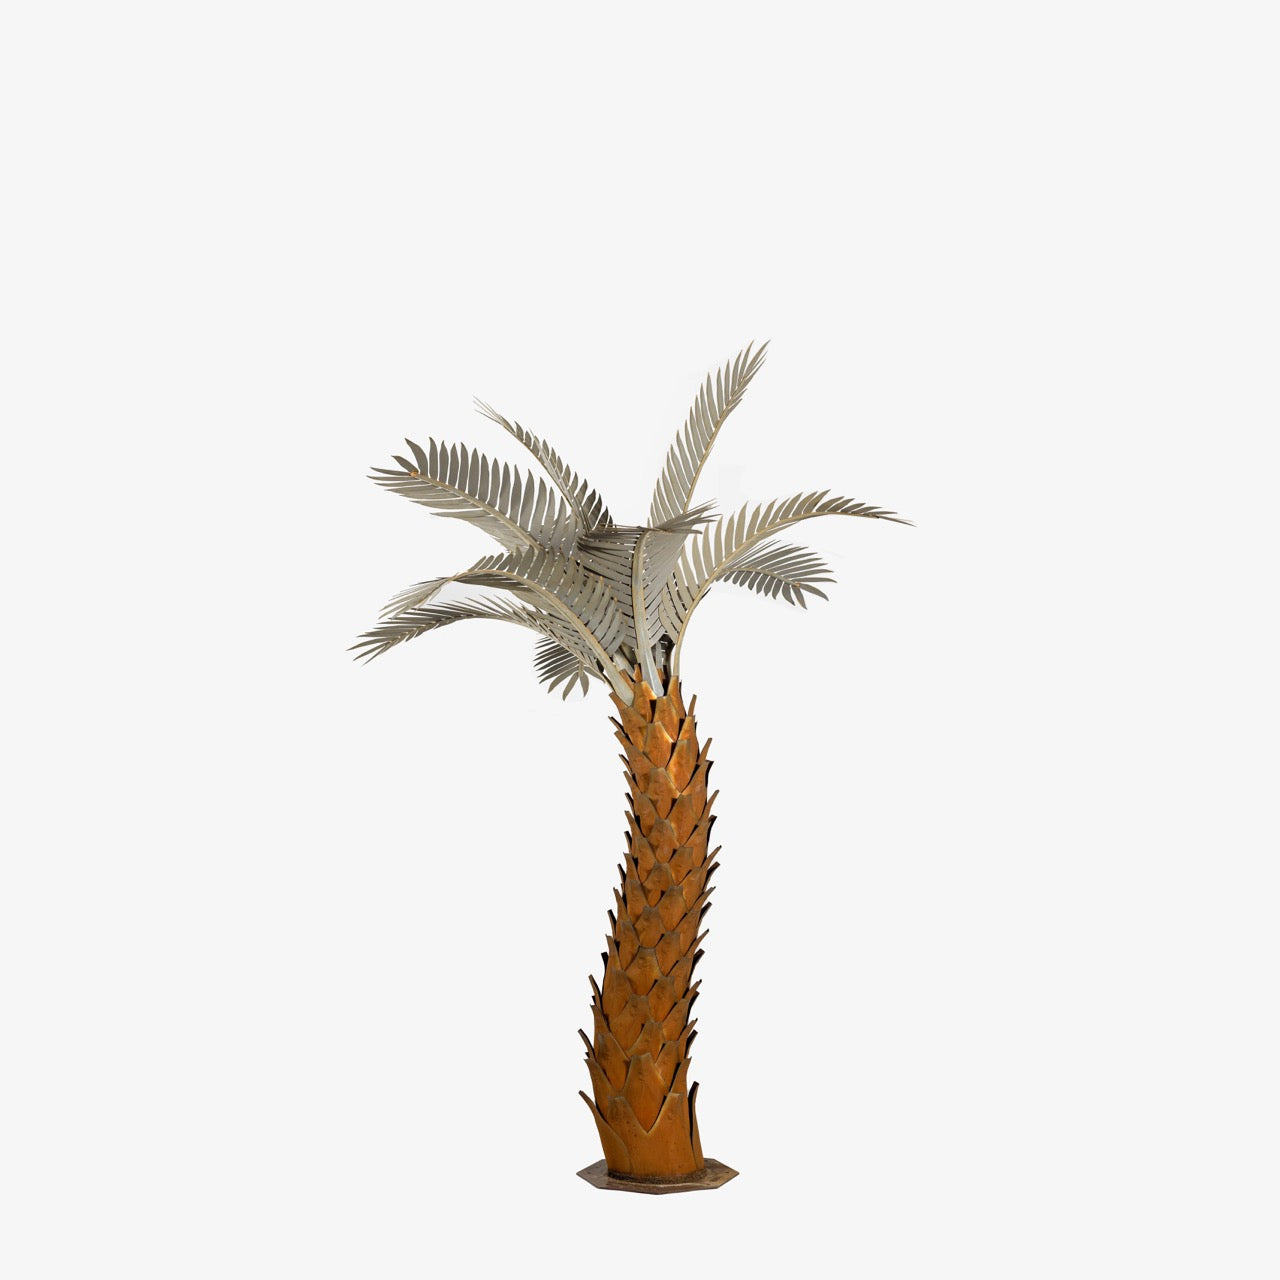 A large metal sunset palm tree, standing 10ft tall, against a white background. The sculpture's intricate design features realistic palm fronds and textured trunk, creating a lifelike appearance.